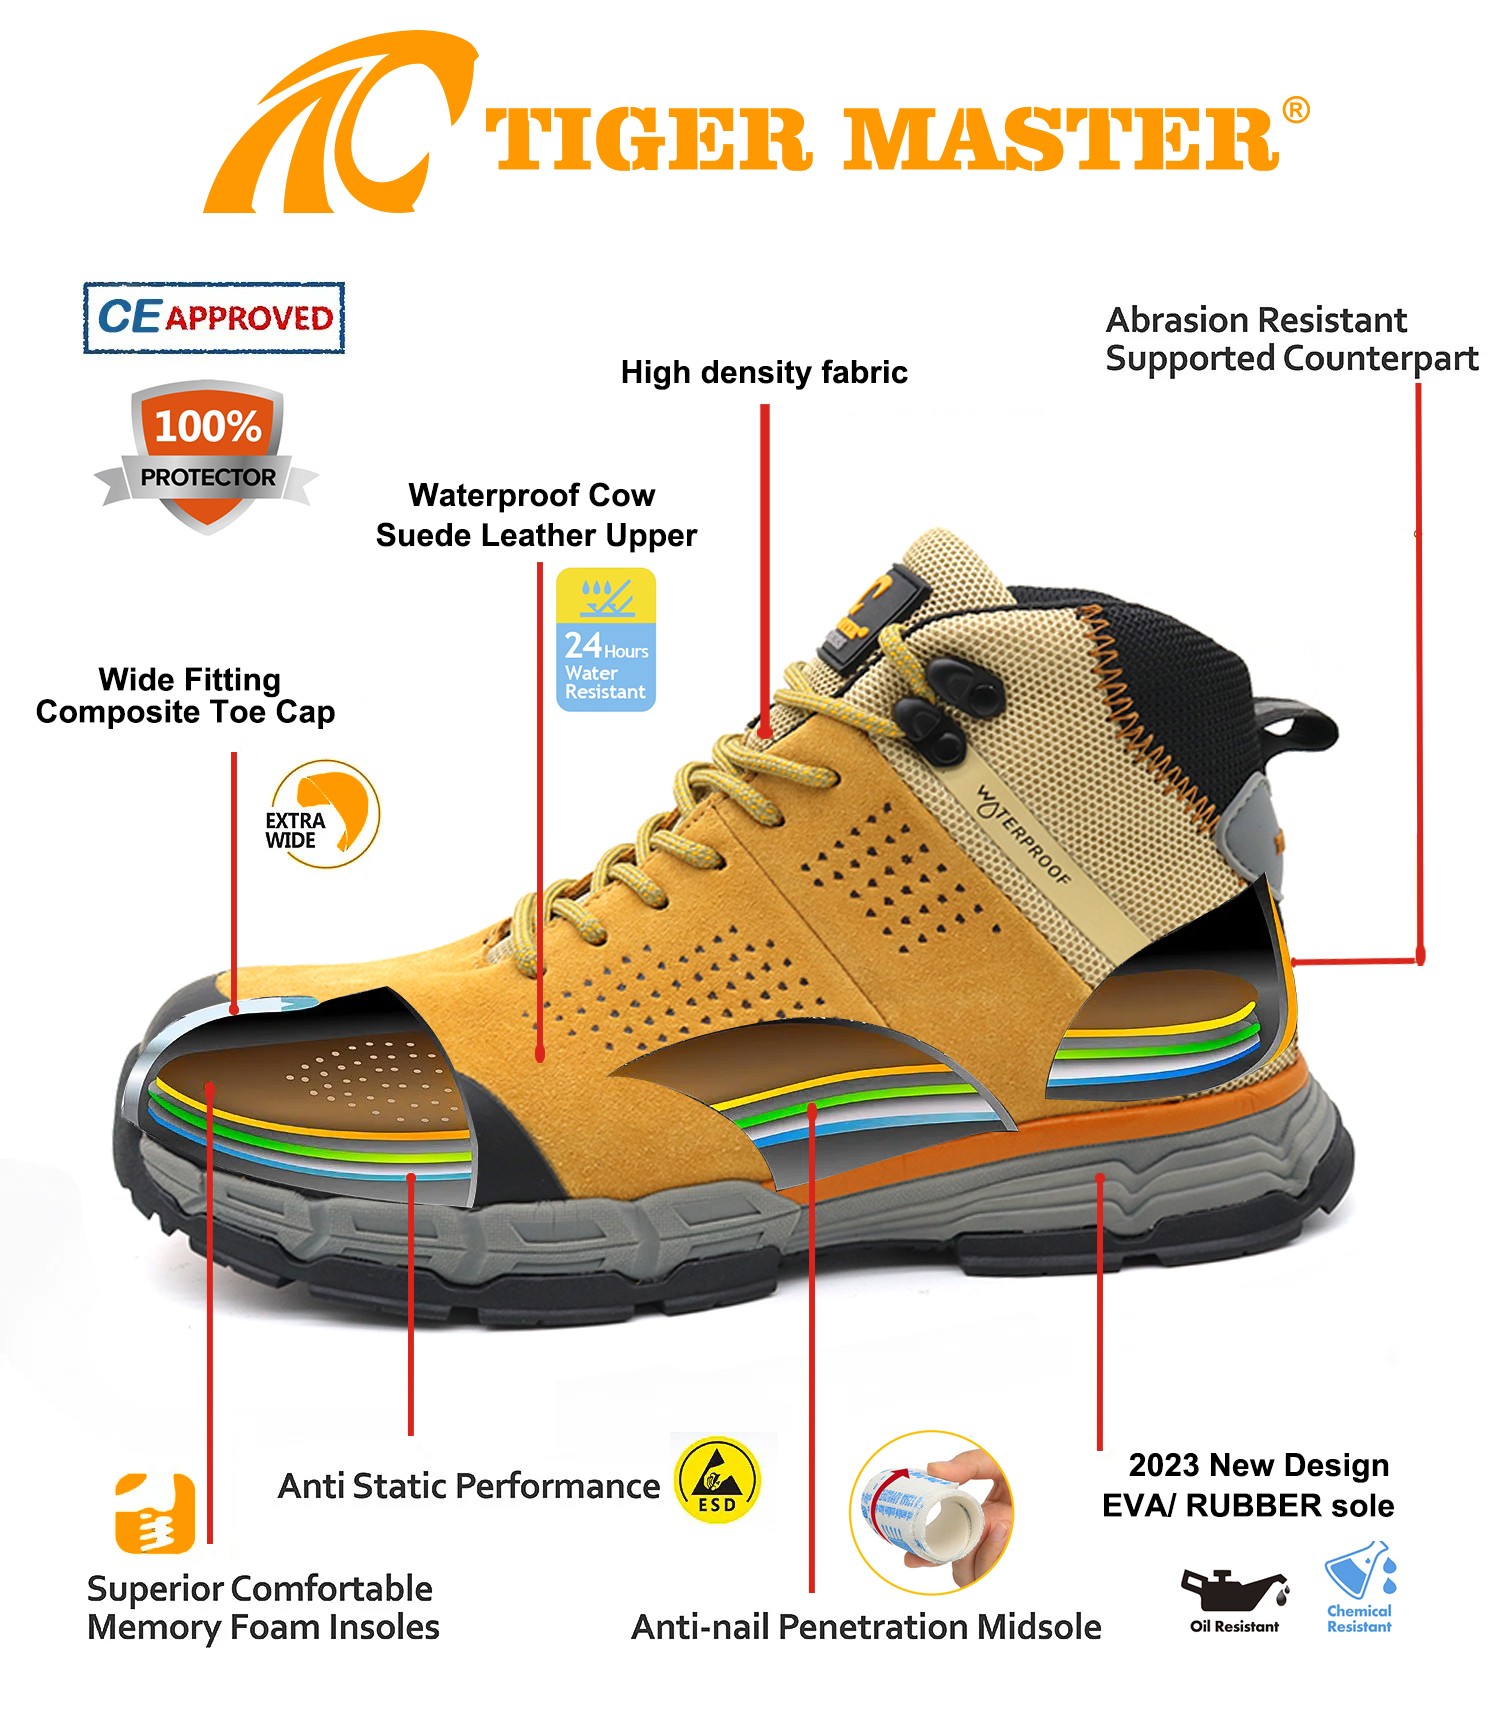 High Ankle Fiberglass Toe Safety Shoes for Men Waterproof